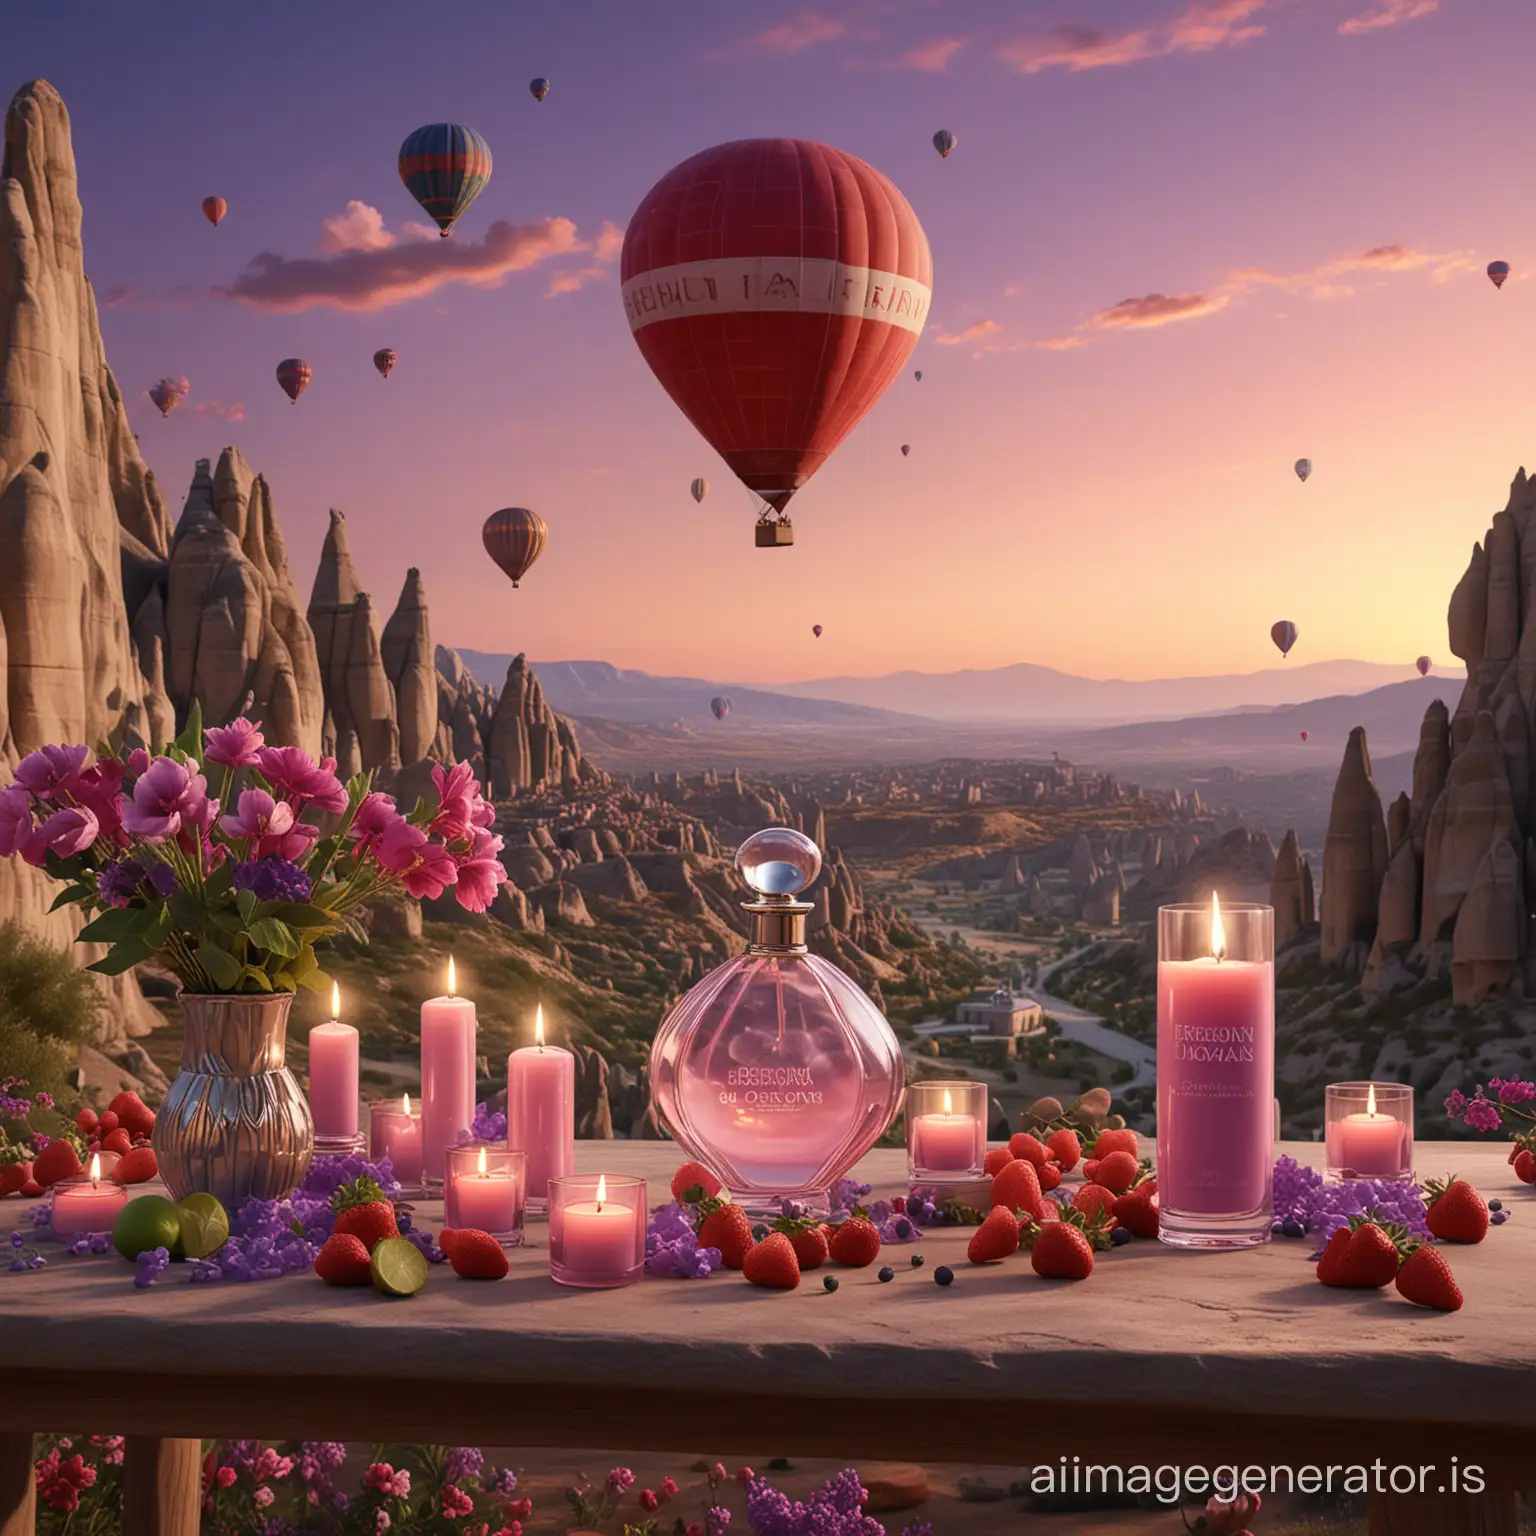 Romantic-Perfume-Product-Display-with-Fruits-and-Candles-in-Cappadocia-Landscape